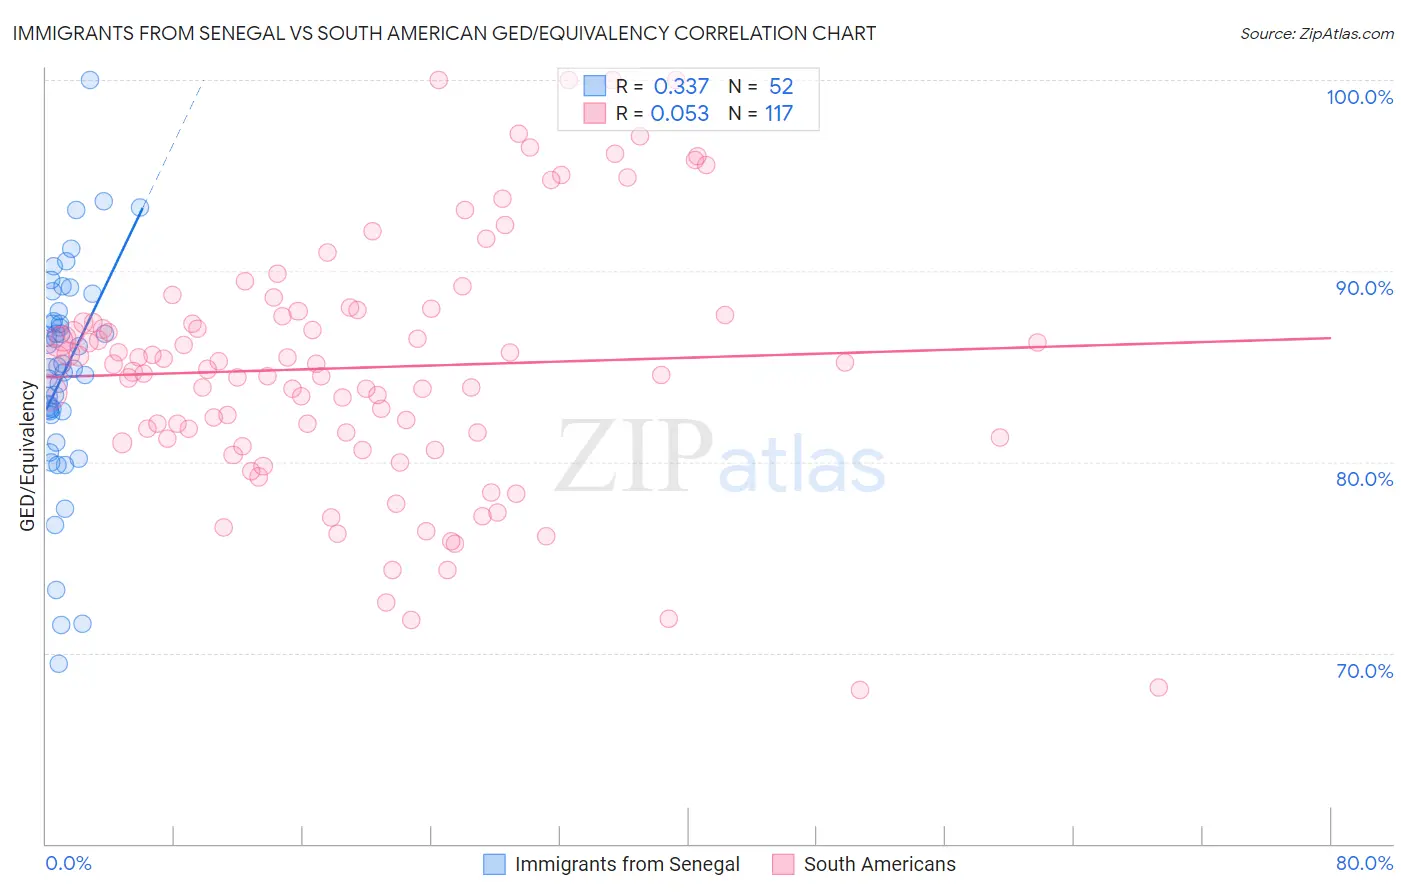 Immigrants from Senegal vs South American GED/Equivalency